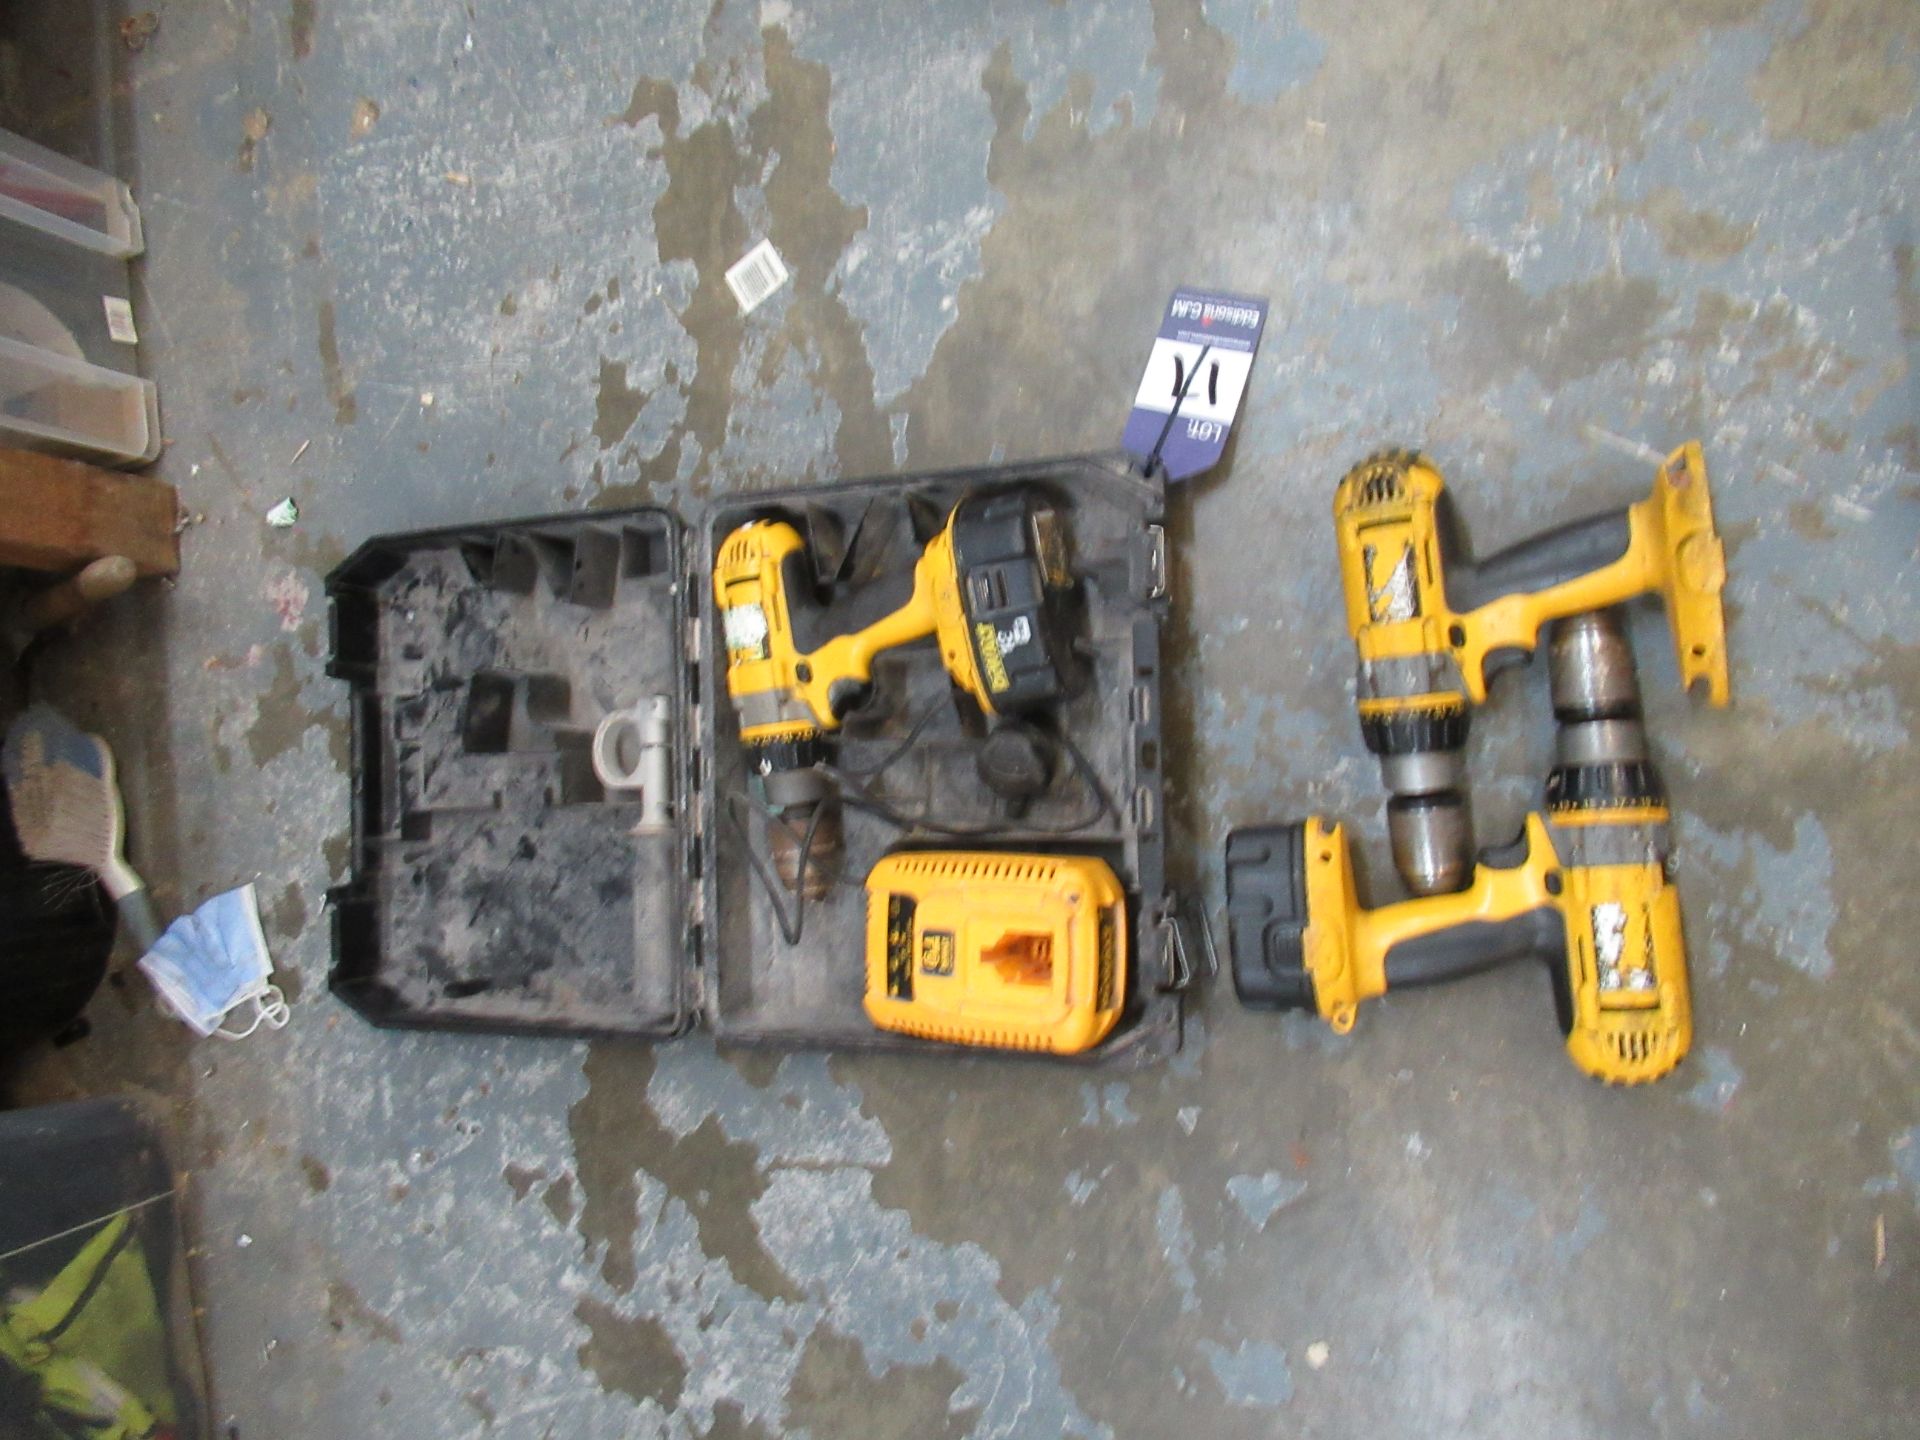 1x DeWalt Cordless Drill with battery and charger in case along with 2x DeWalt Cordless Drill Bodies